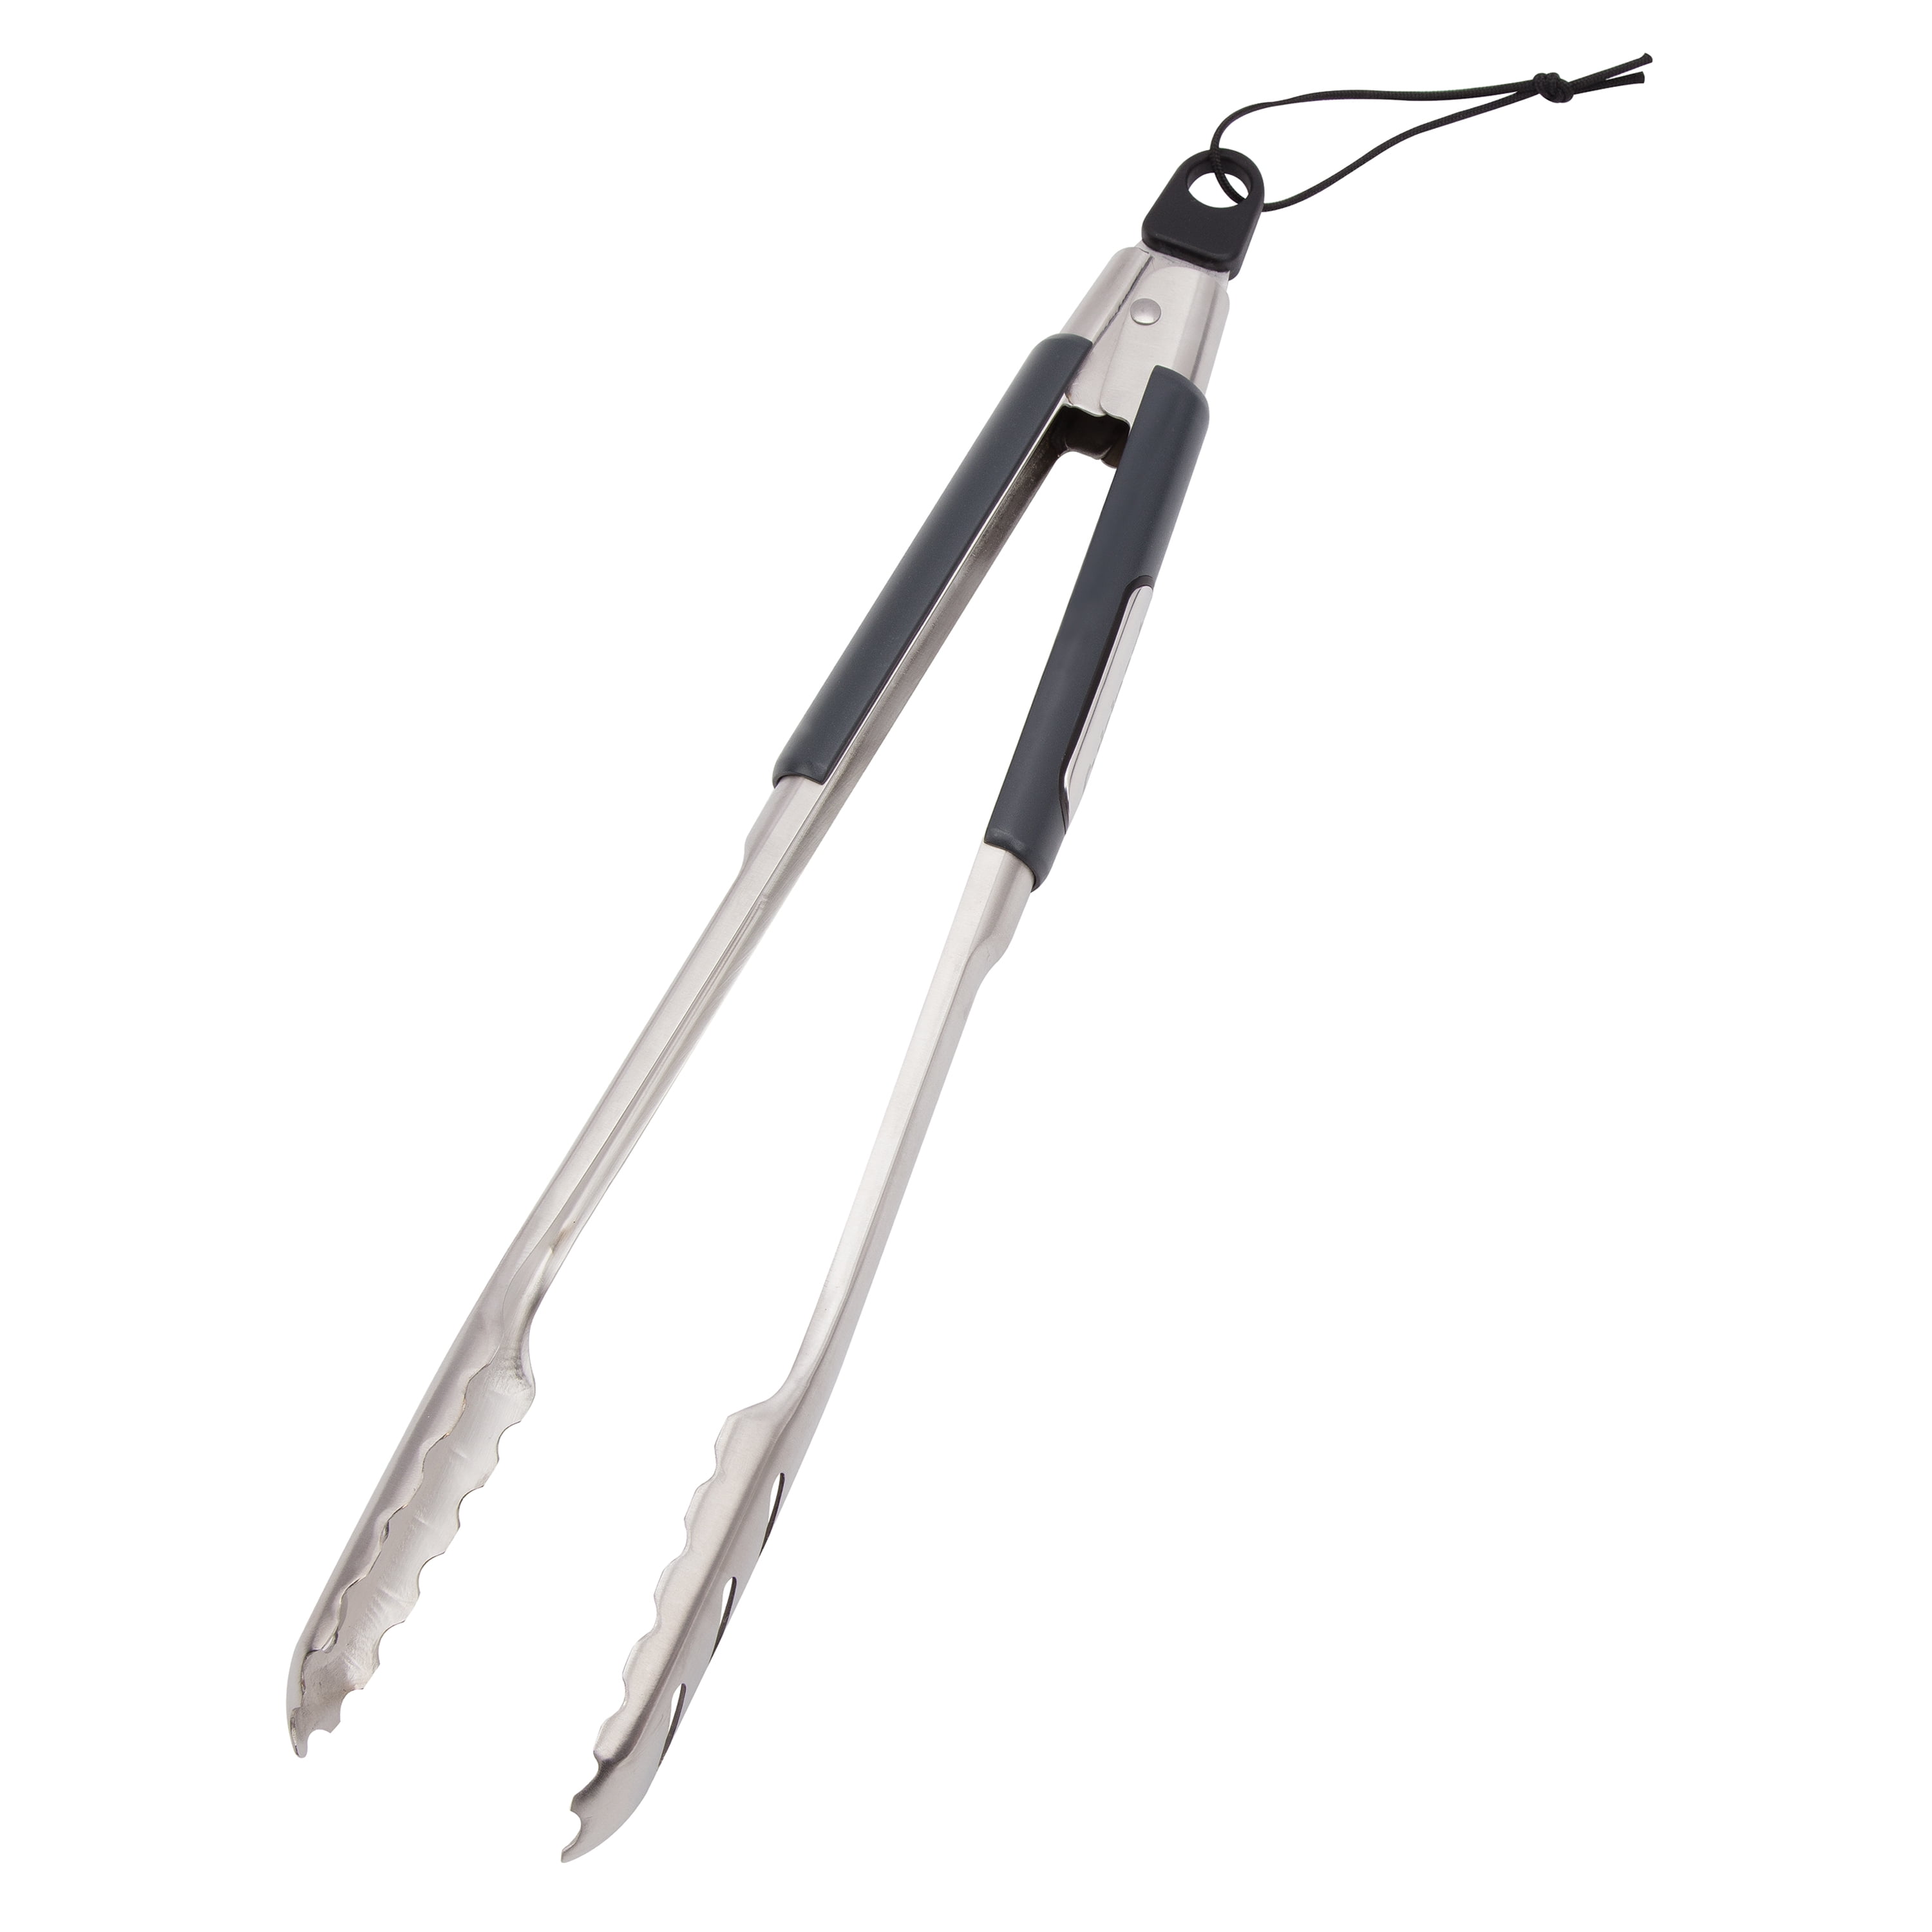 Cuisinart Silicone-Tipped 9-Inch Tongs,Black $5.09